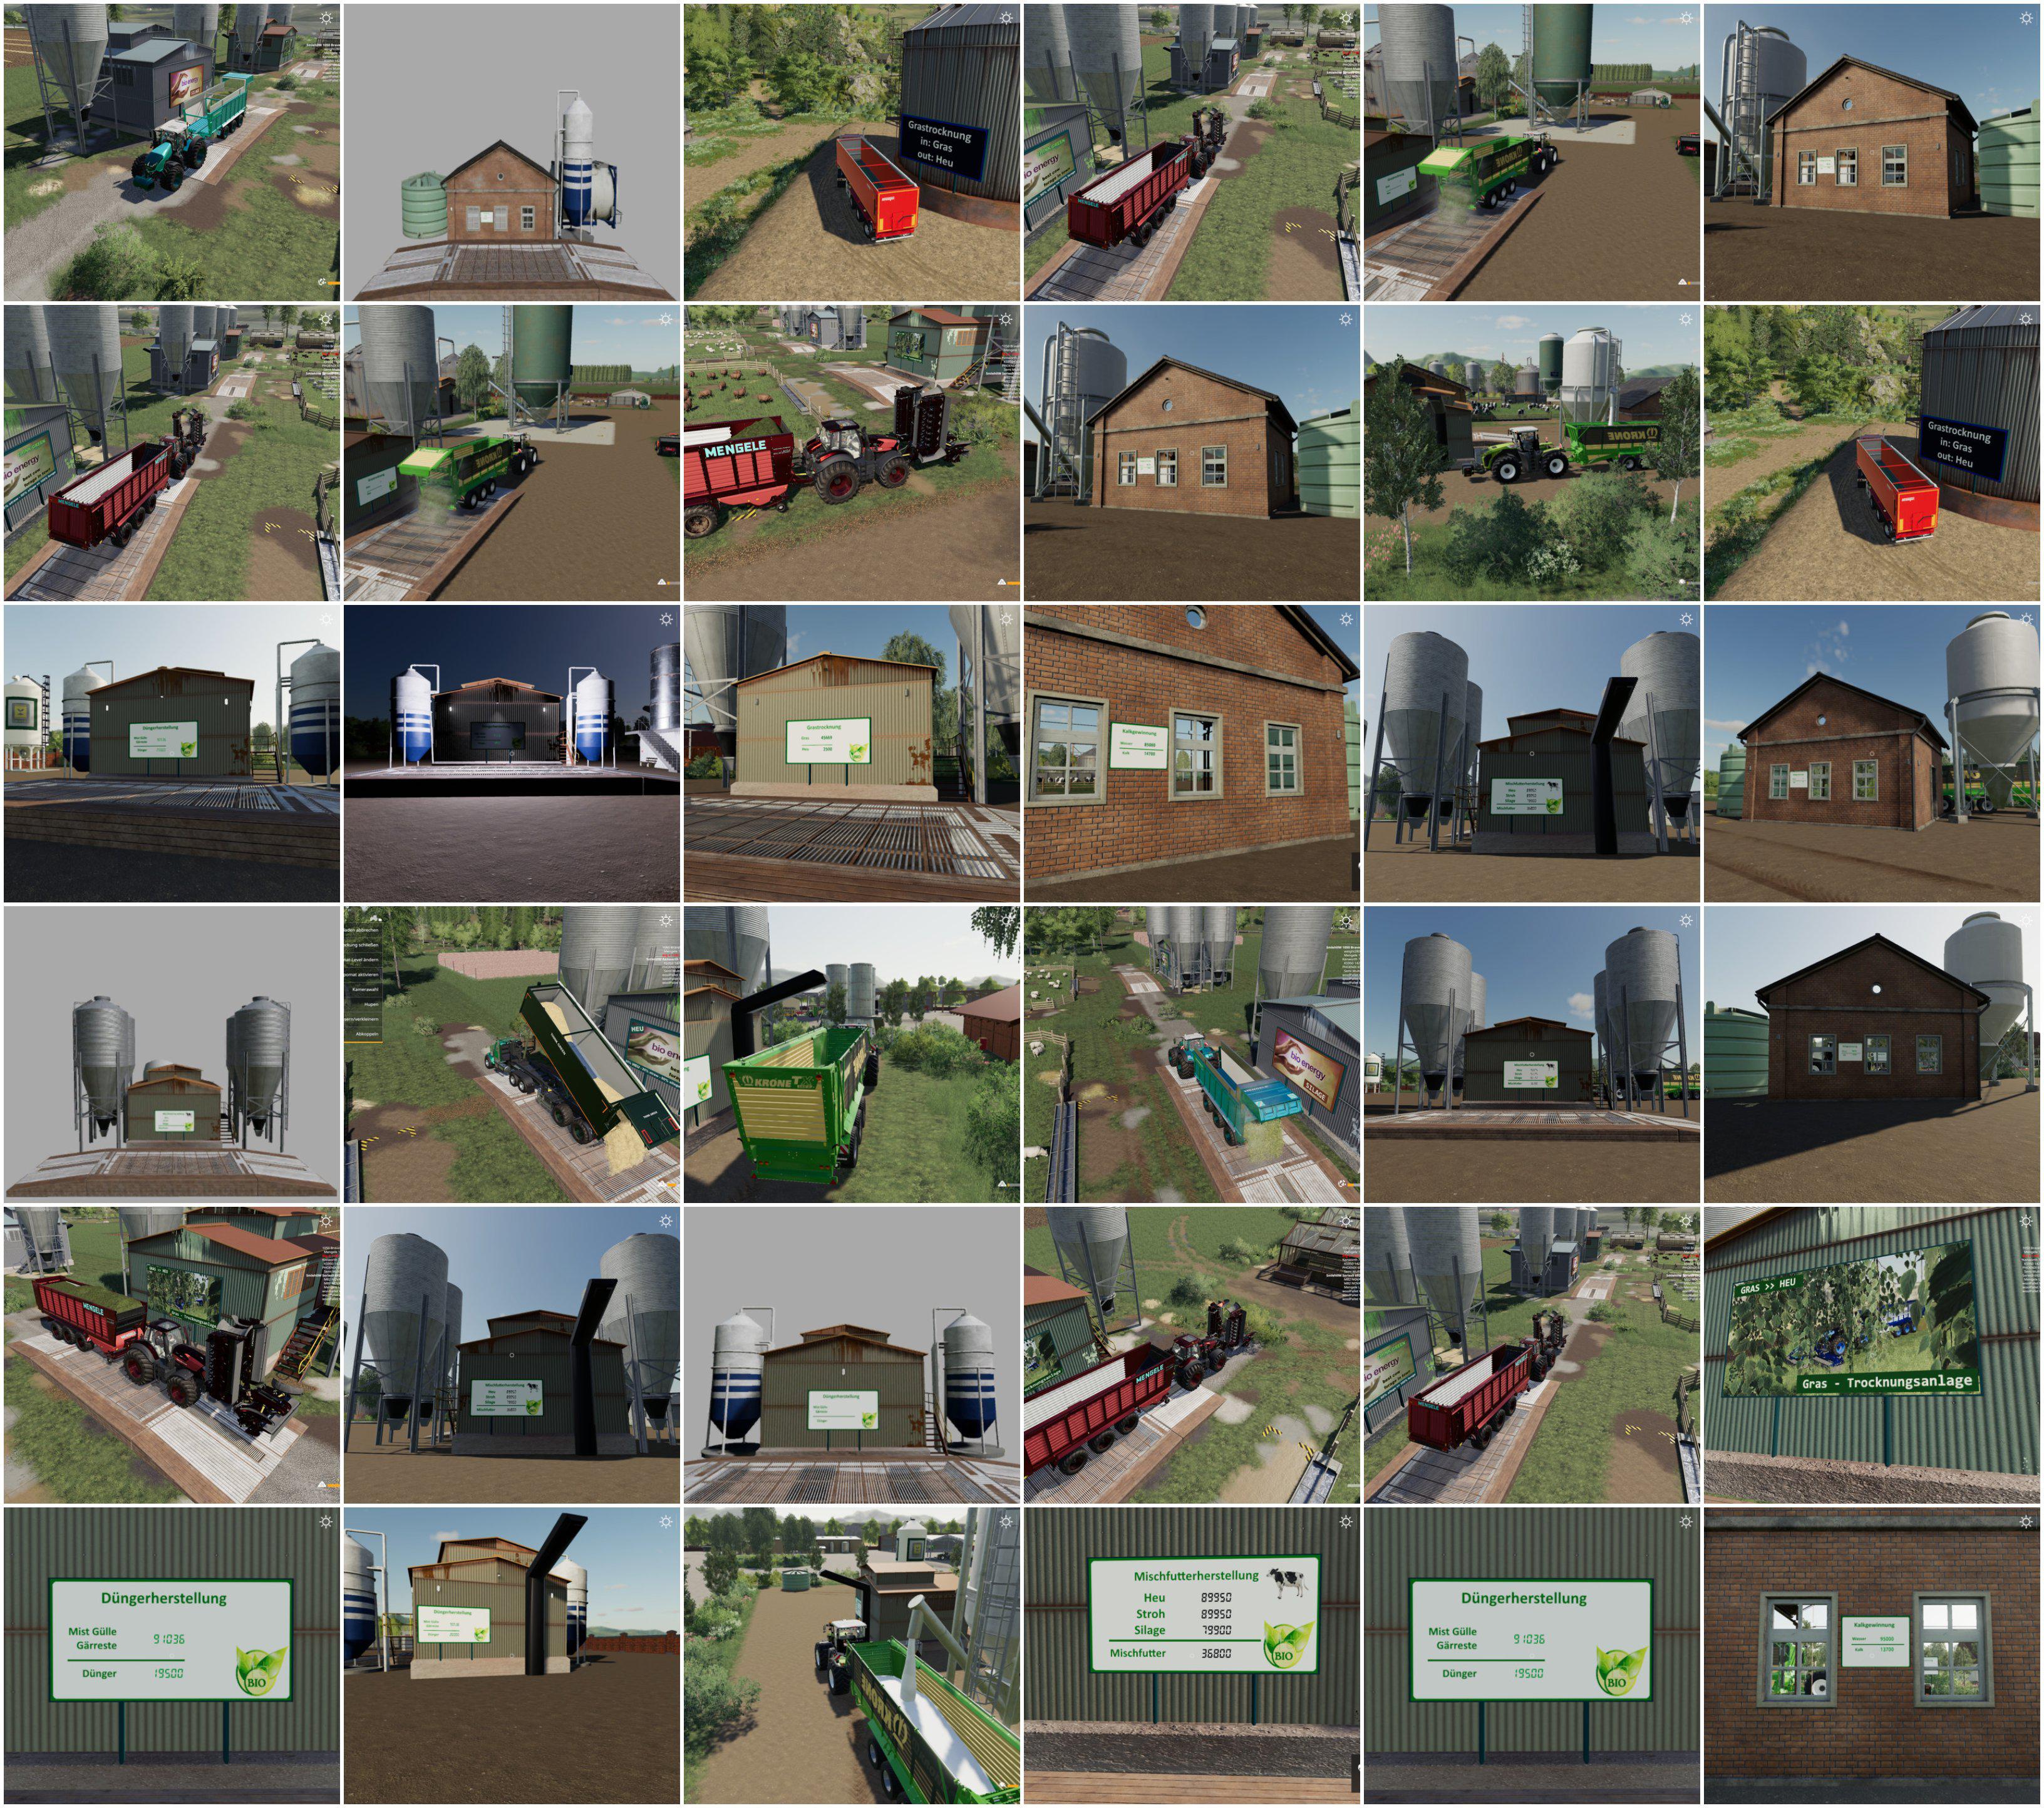 Fs Objects Farming Simulator Obejcts Mods Ls Mods Images And